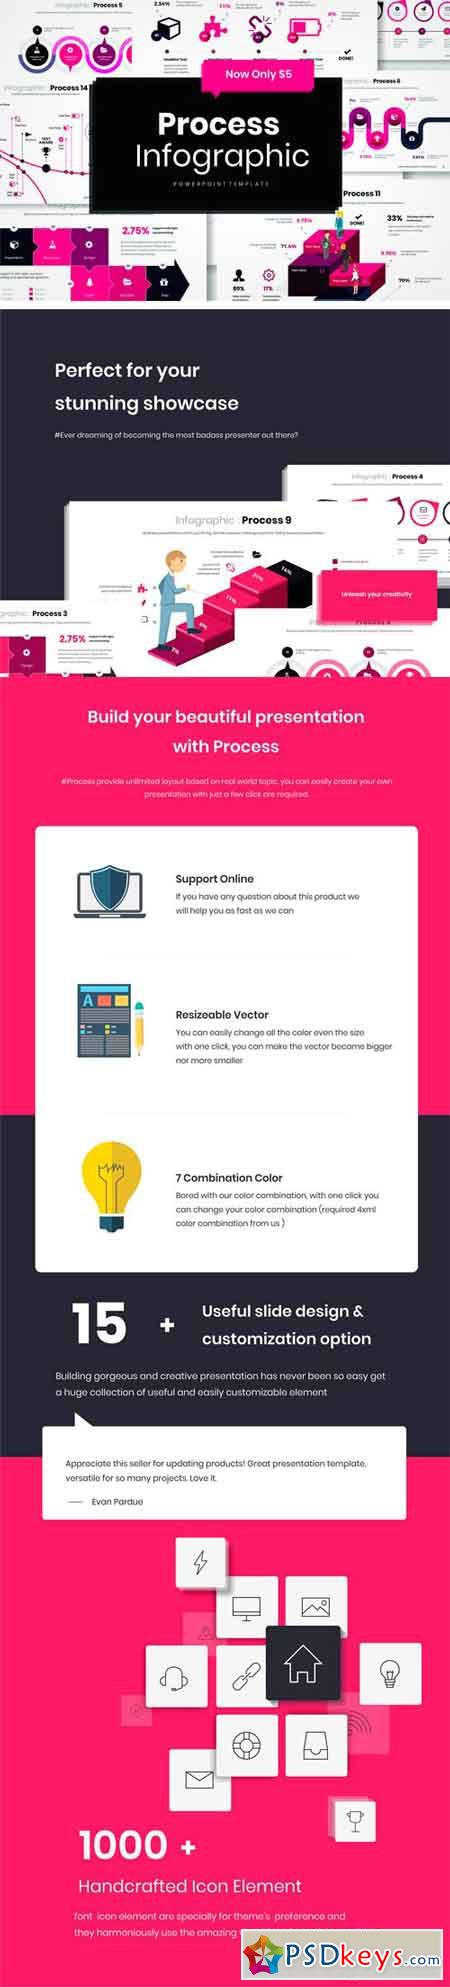 Process Infographic PowerPoint 2271981